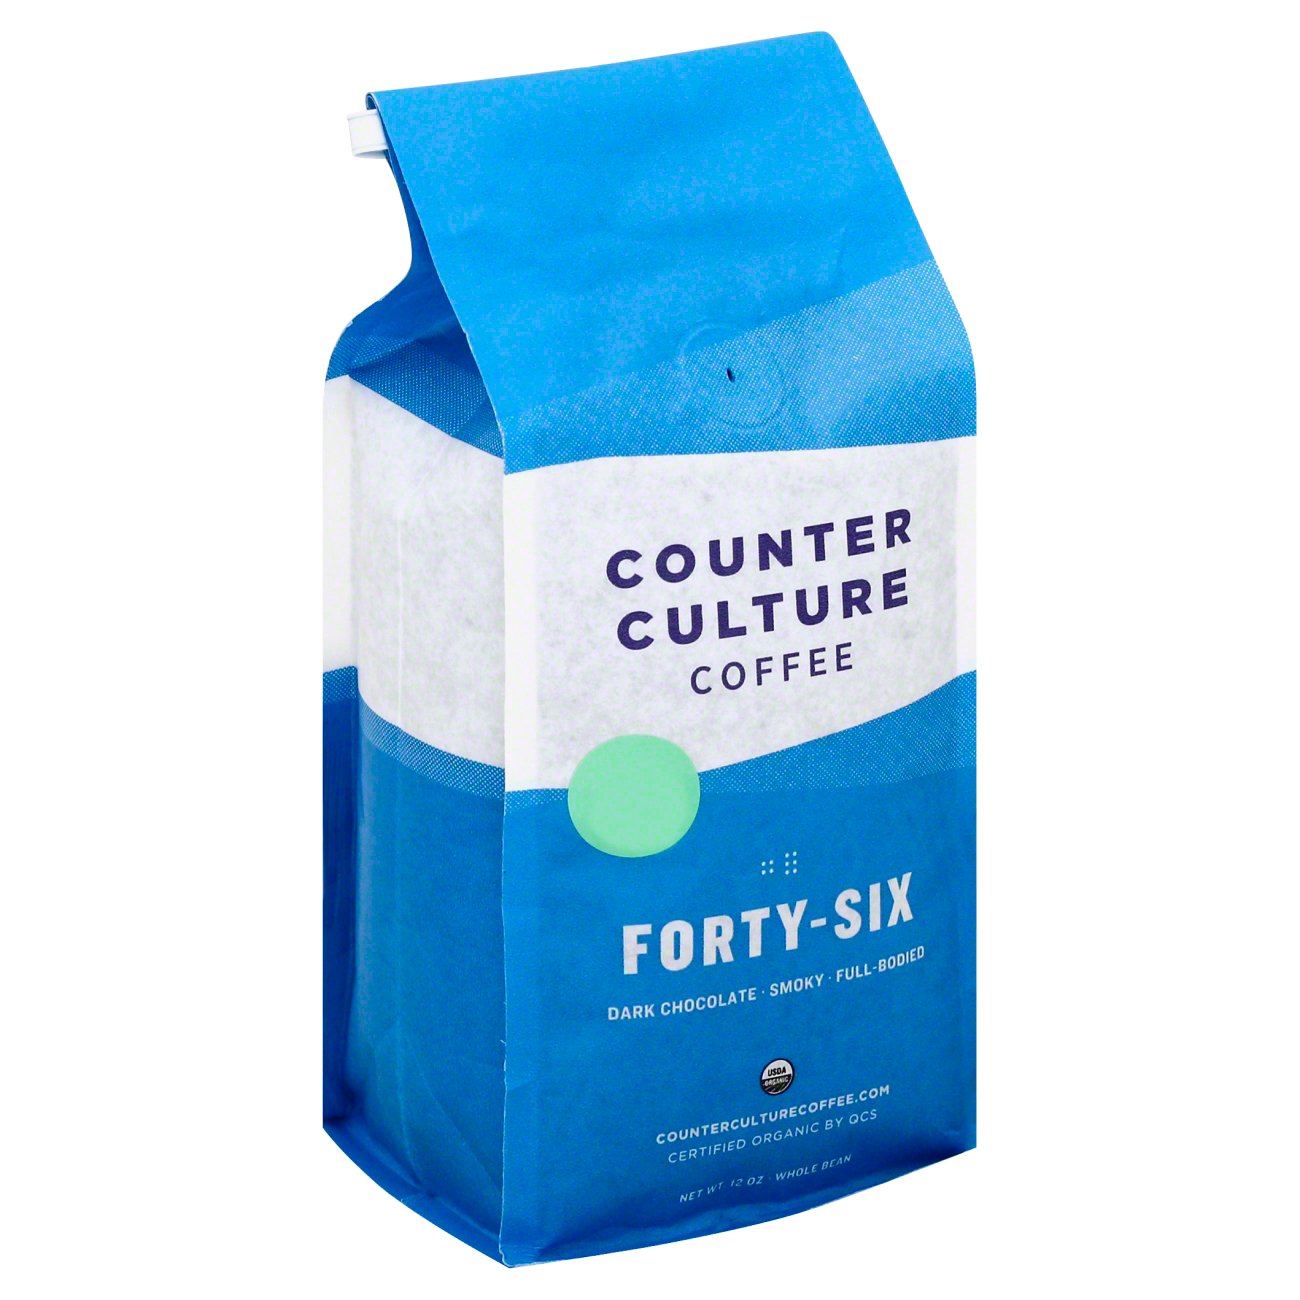 Counter Culture Coffee Staff Recommendations